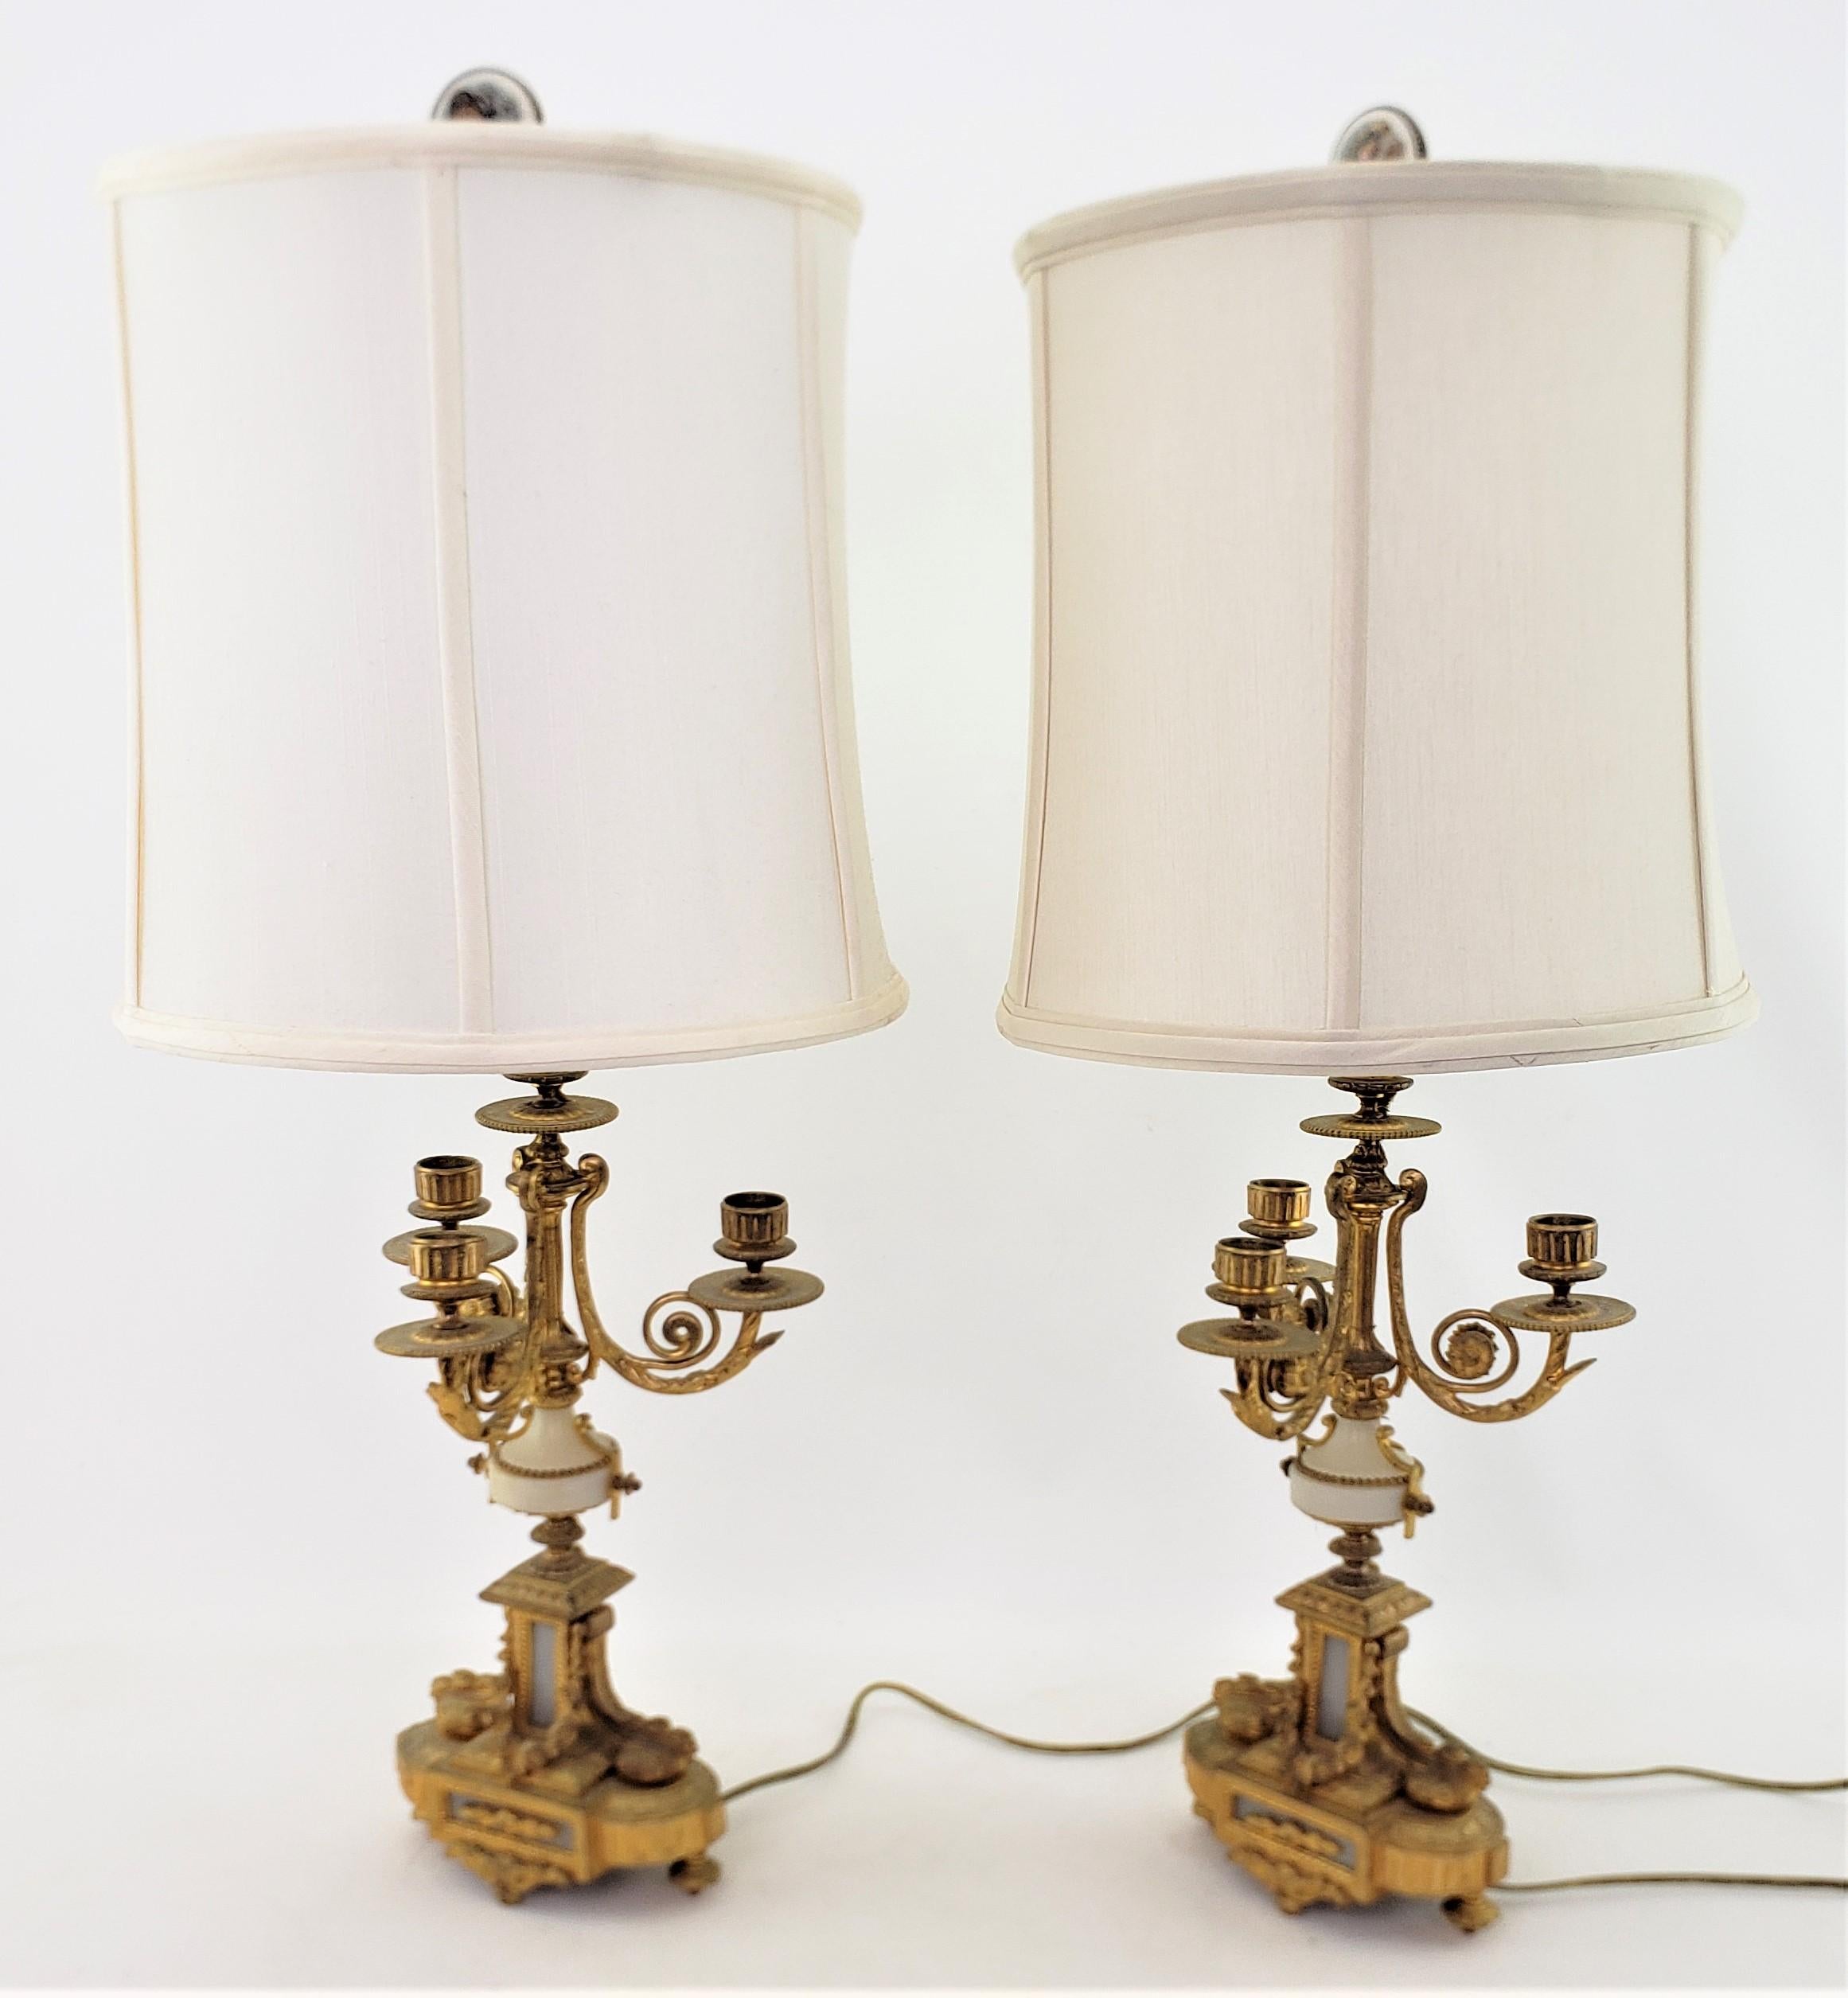 Renaissance Revival Pair of Ornate Antique French Gilt Bronze Converted Candelabra Table Lamps For Sale